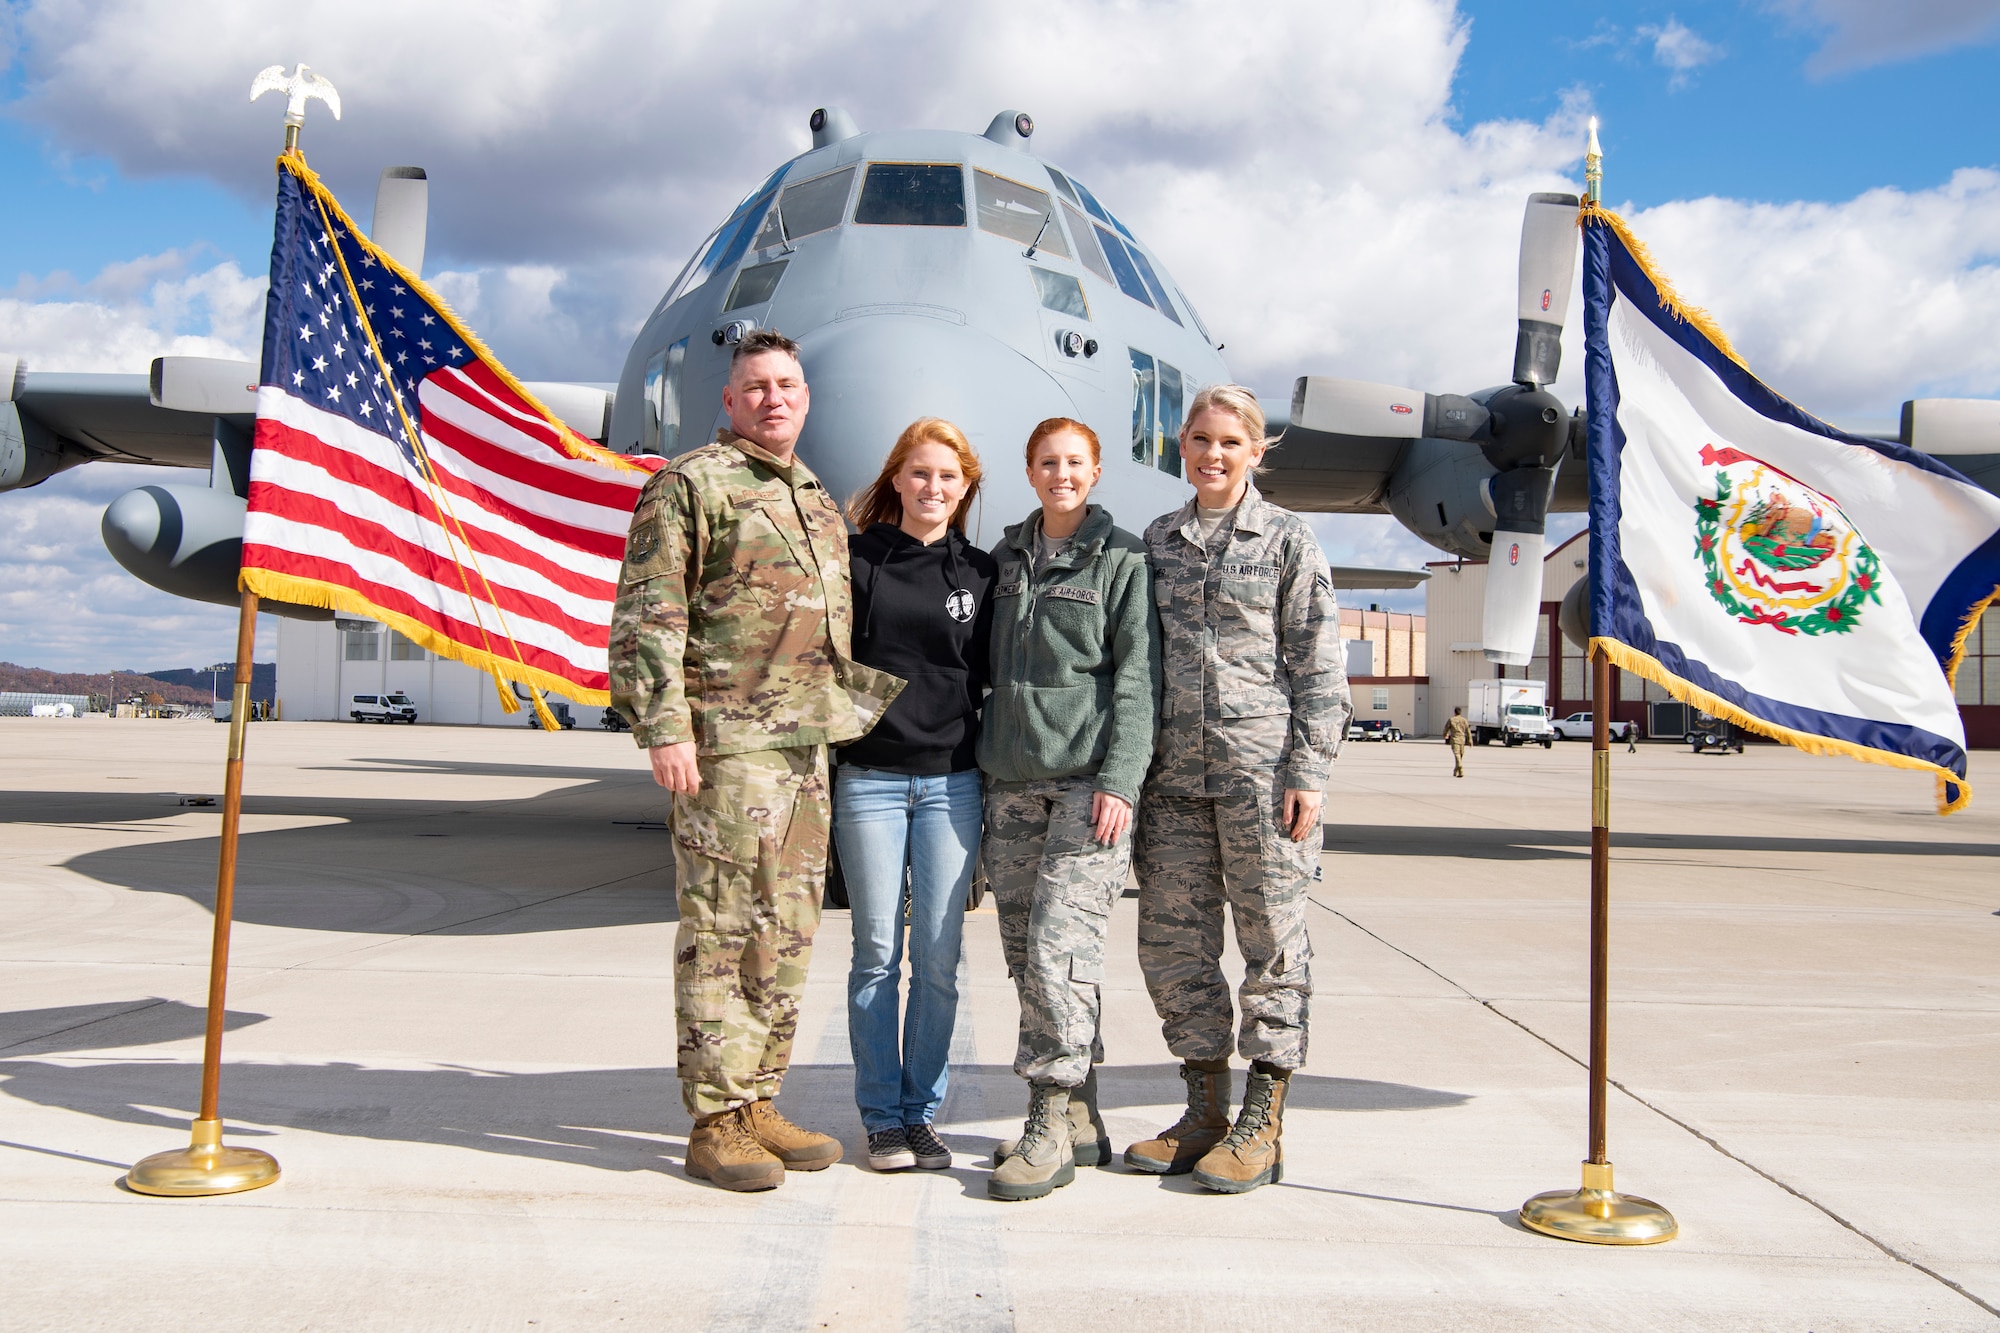 Lt. Col. Andrew Farmer, 130th Logistics Readiness Squadron Commander, stands with his daughters Halle Farmer, Staff Sgt. Alexis Farmer and Senior Airman Carly Farmer in front of a C-130H Nov. 3, 2018 at McLaughlin Air National Guard Base, Charleston, W.Va. (U.S. Air National Guard Photo by Airman 1st Class Caleb Vance)